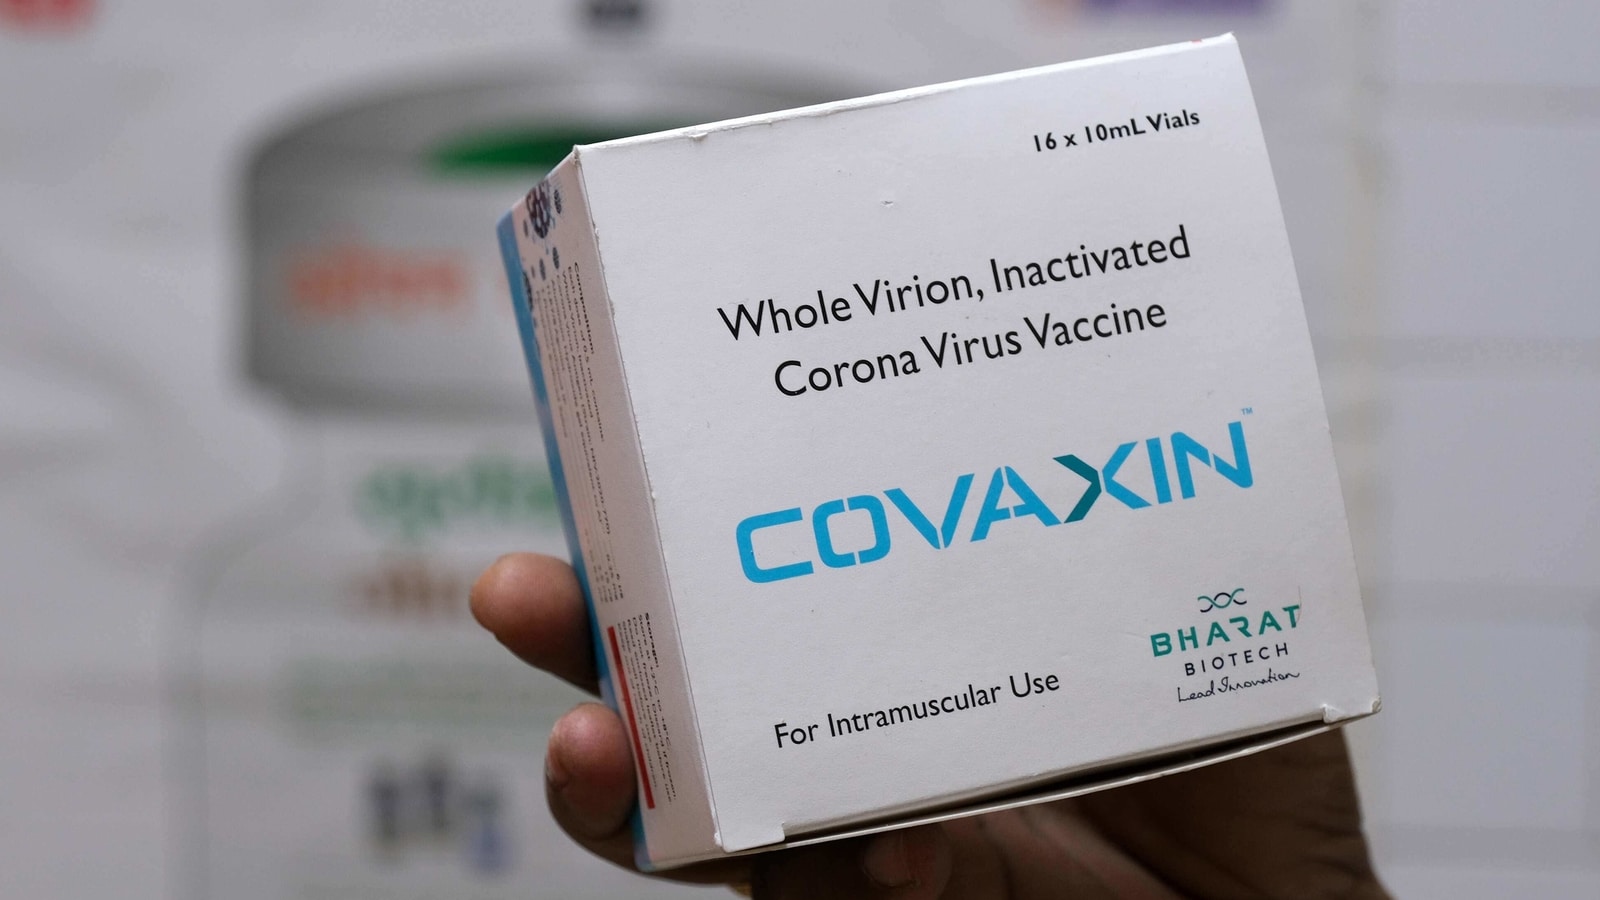 Covaxin safe, can be stored at 2-8 ° C, according to Lancet report